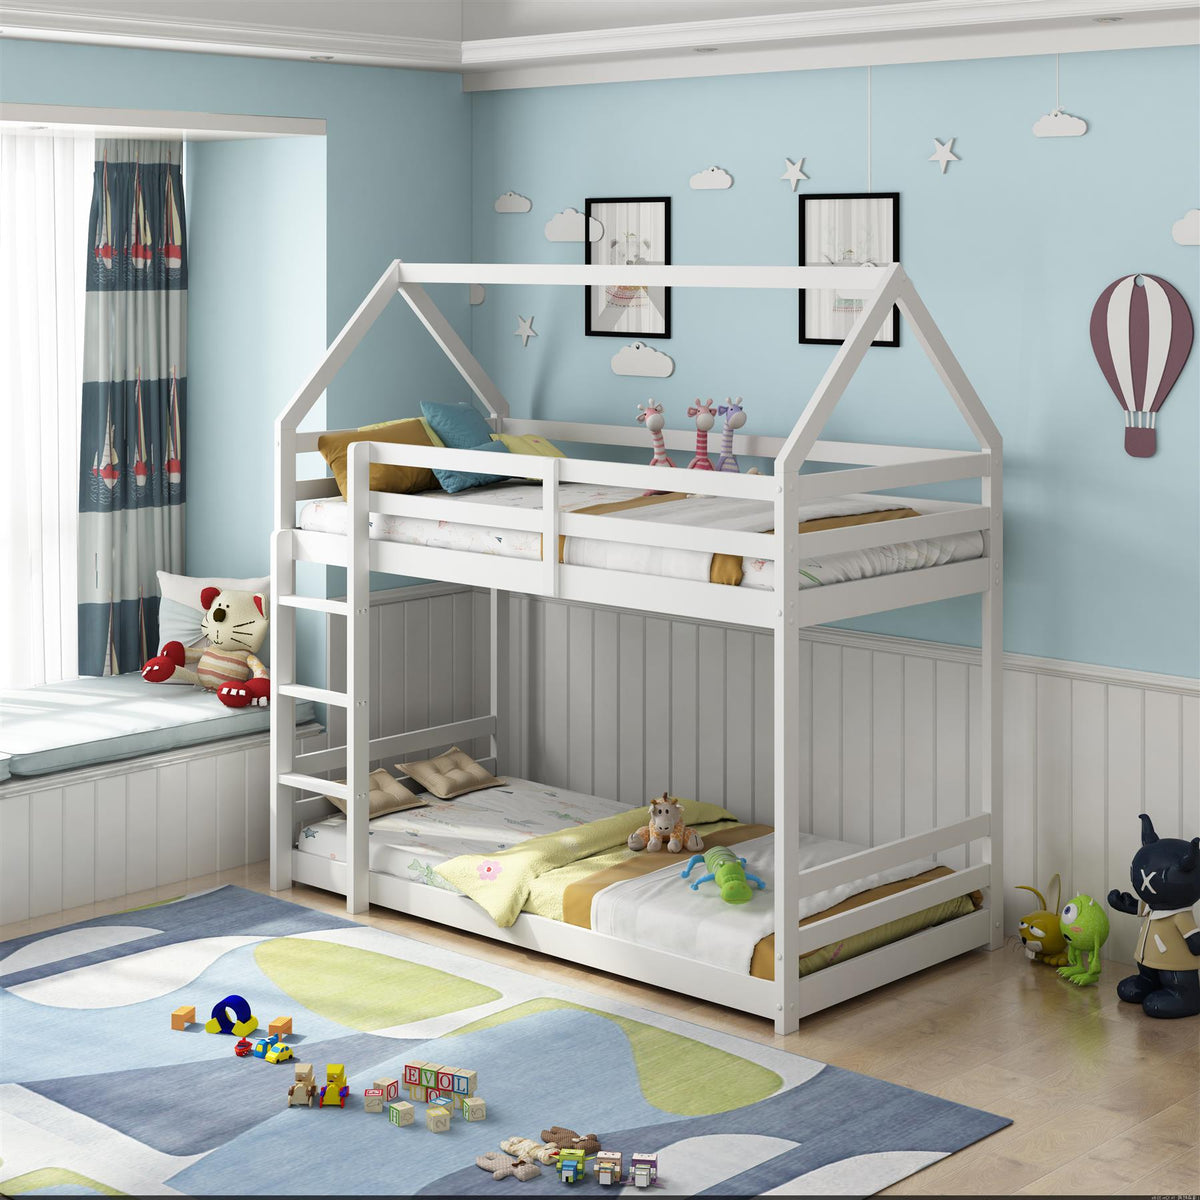 House Bunkbed kids white 3ft single twin bunk bed wooden childrens bedroom furniture